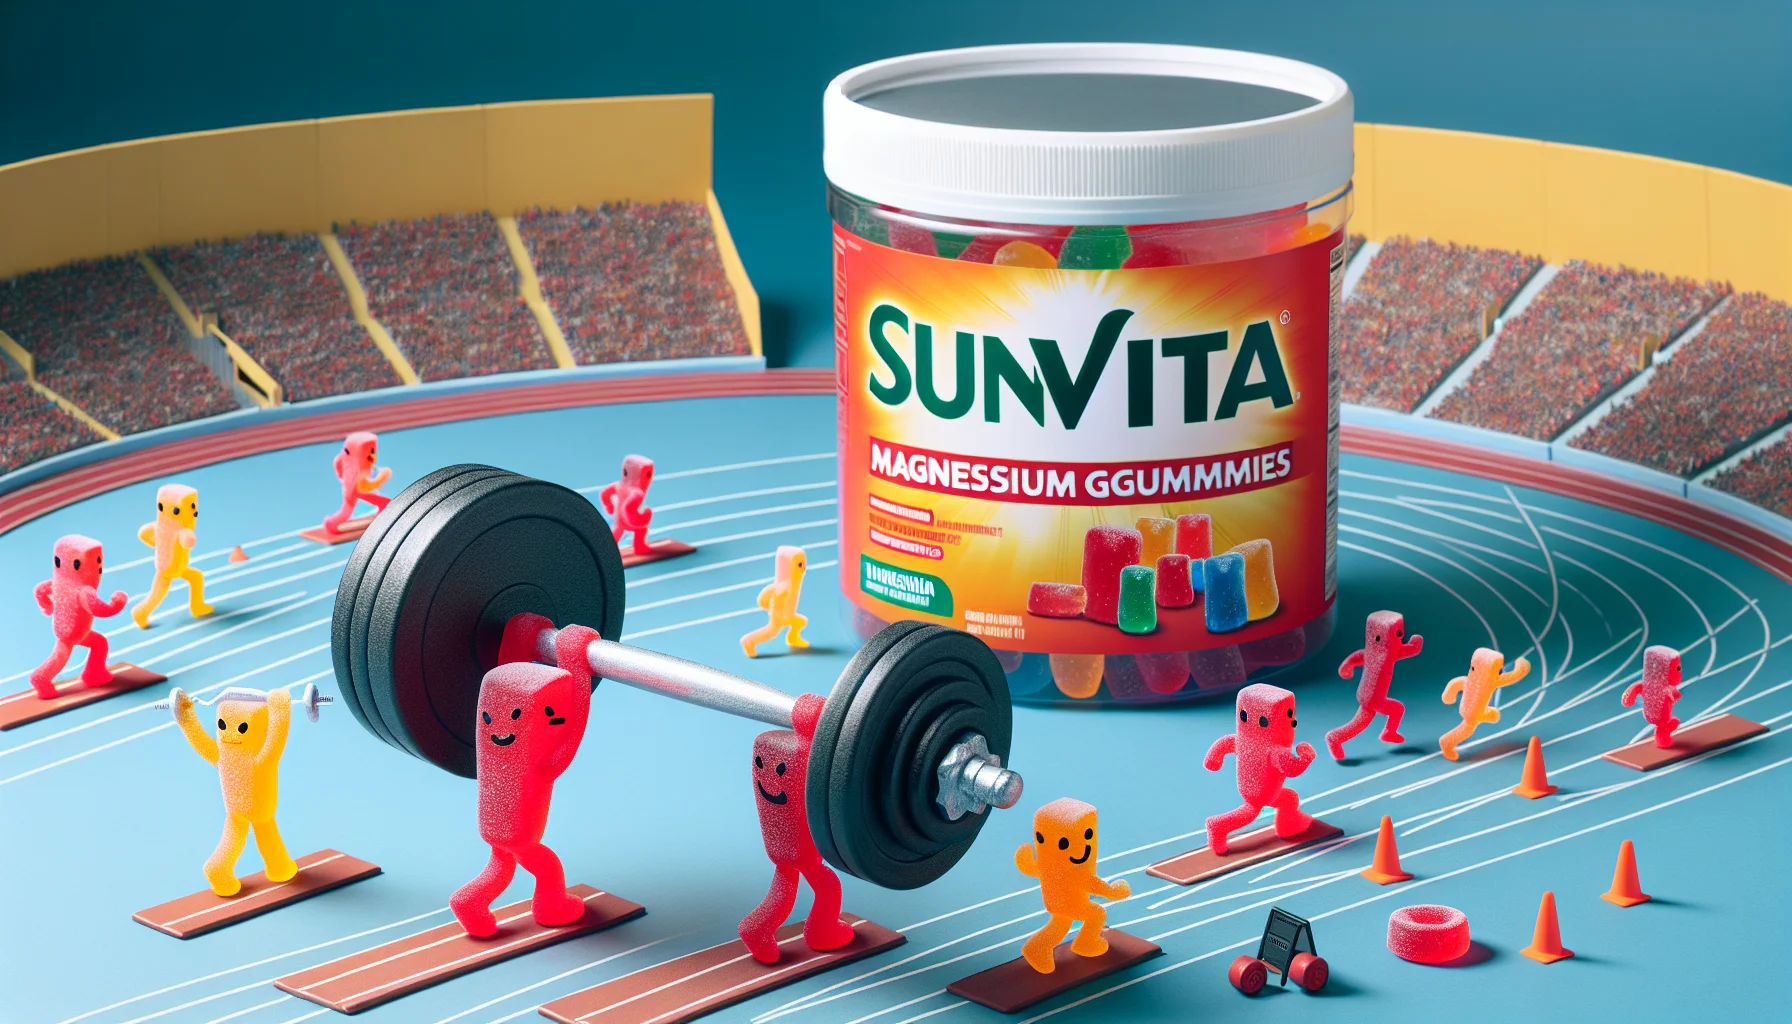 A humorous scene involving a container of fictitious brand 'SunVita' magnesium gummies, designed to lure athletes towards dietary supplementation. The container is sitting at a miniaturized track and field event where tiny animated gummies carnival-like characters are seen participating. The red gummy, shaped like a weightlifter, is successfully lifting a massive dumbbell, creating a fun appeal. The orange one, dressed like a runner, is zooming past the finish line, showing endurance. The supersized container in the backdrop encapsulates the excitement, emphasizes the importance of magnesium supplements in boosting sports performance.